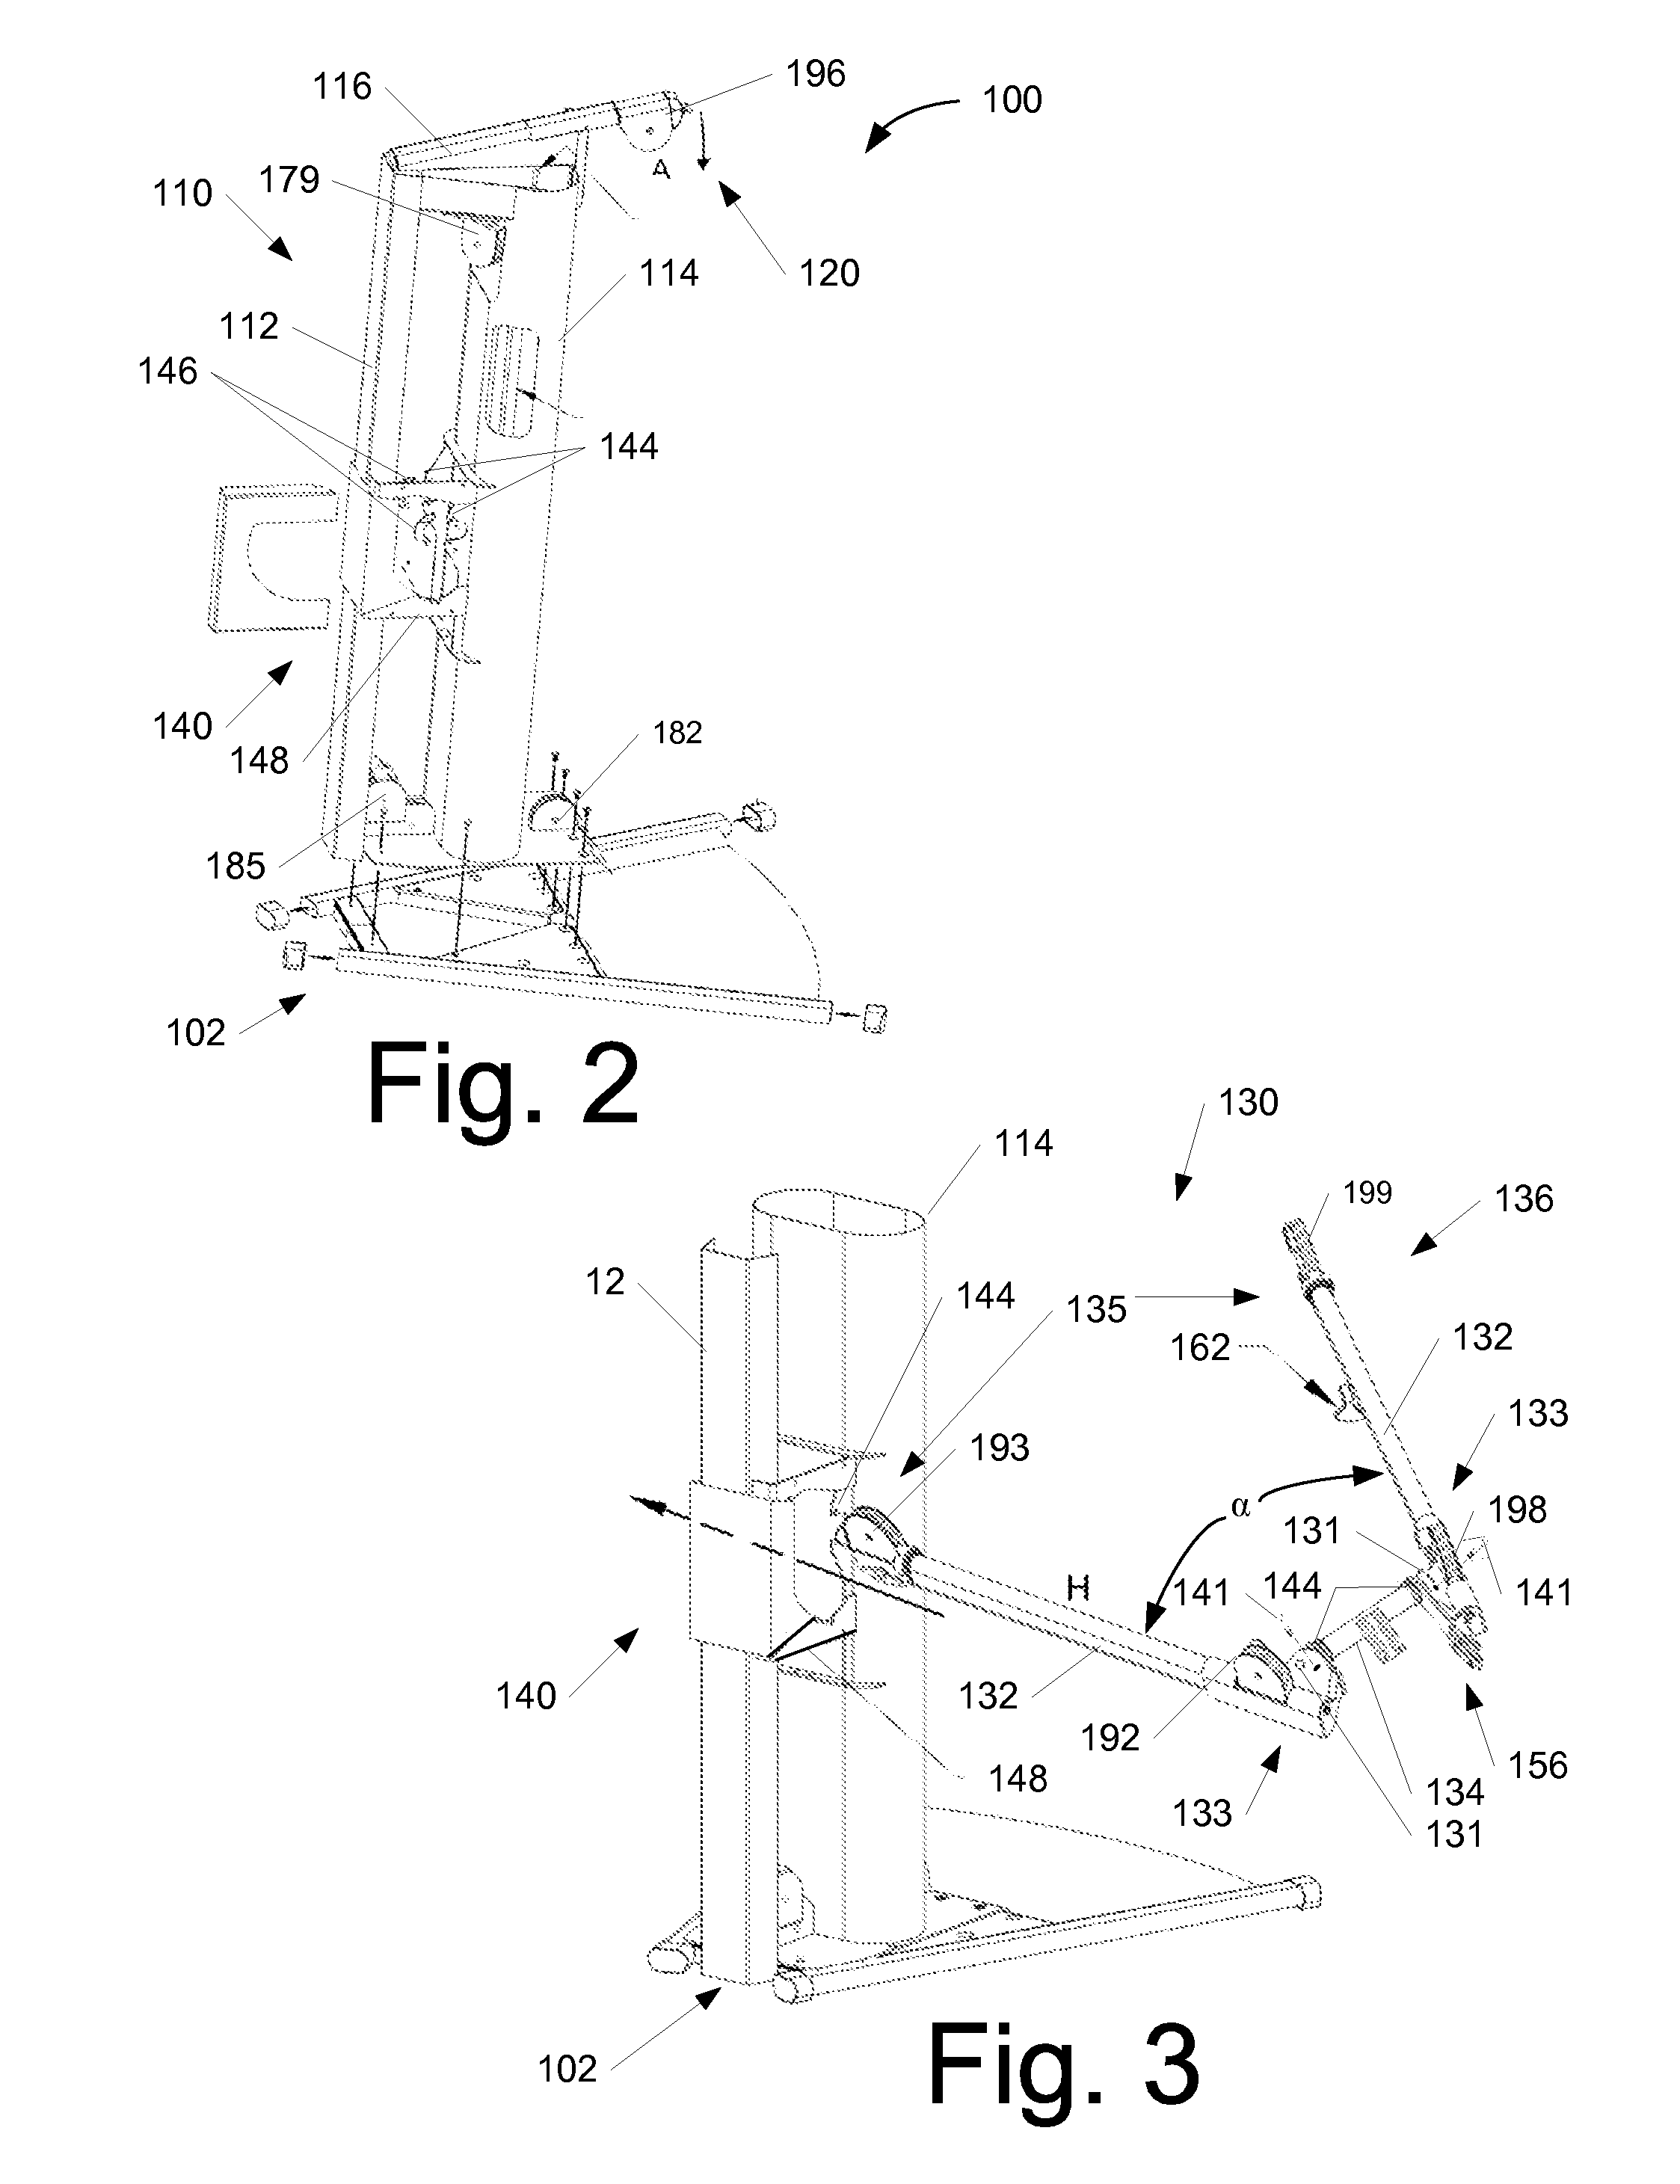 Exercise assemblies having self-adjusting pad devices